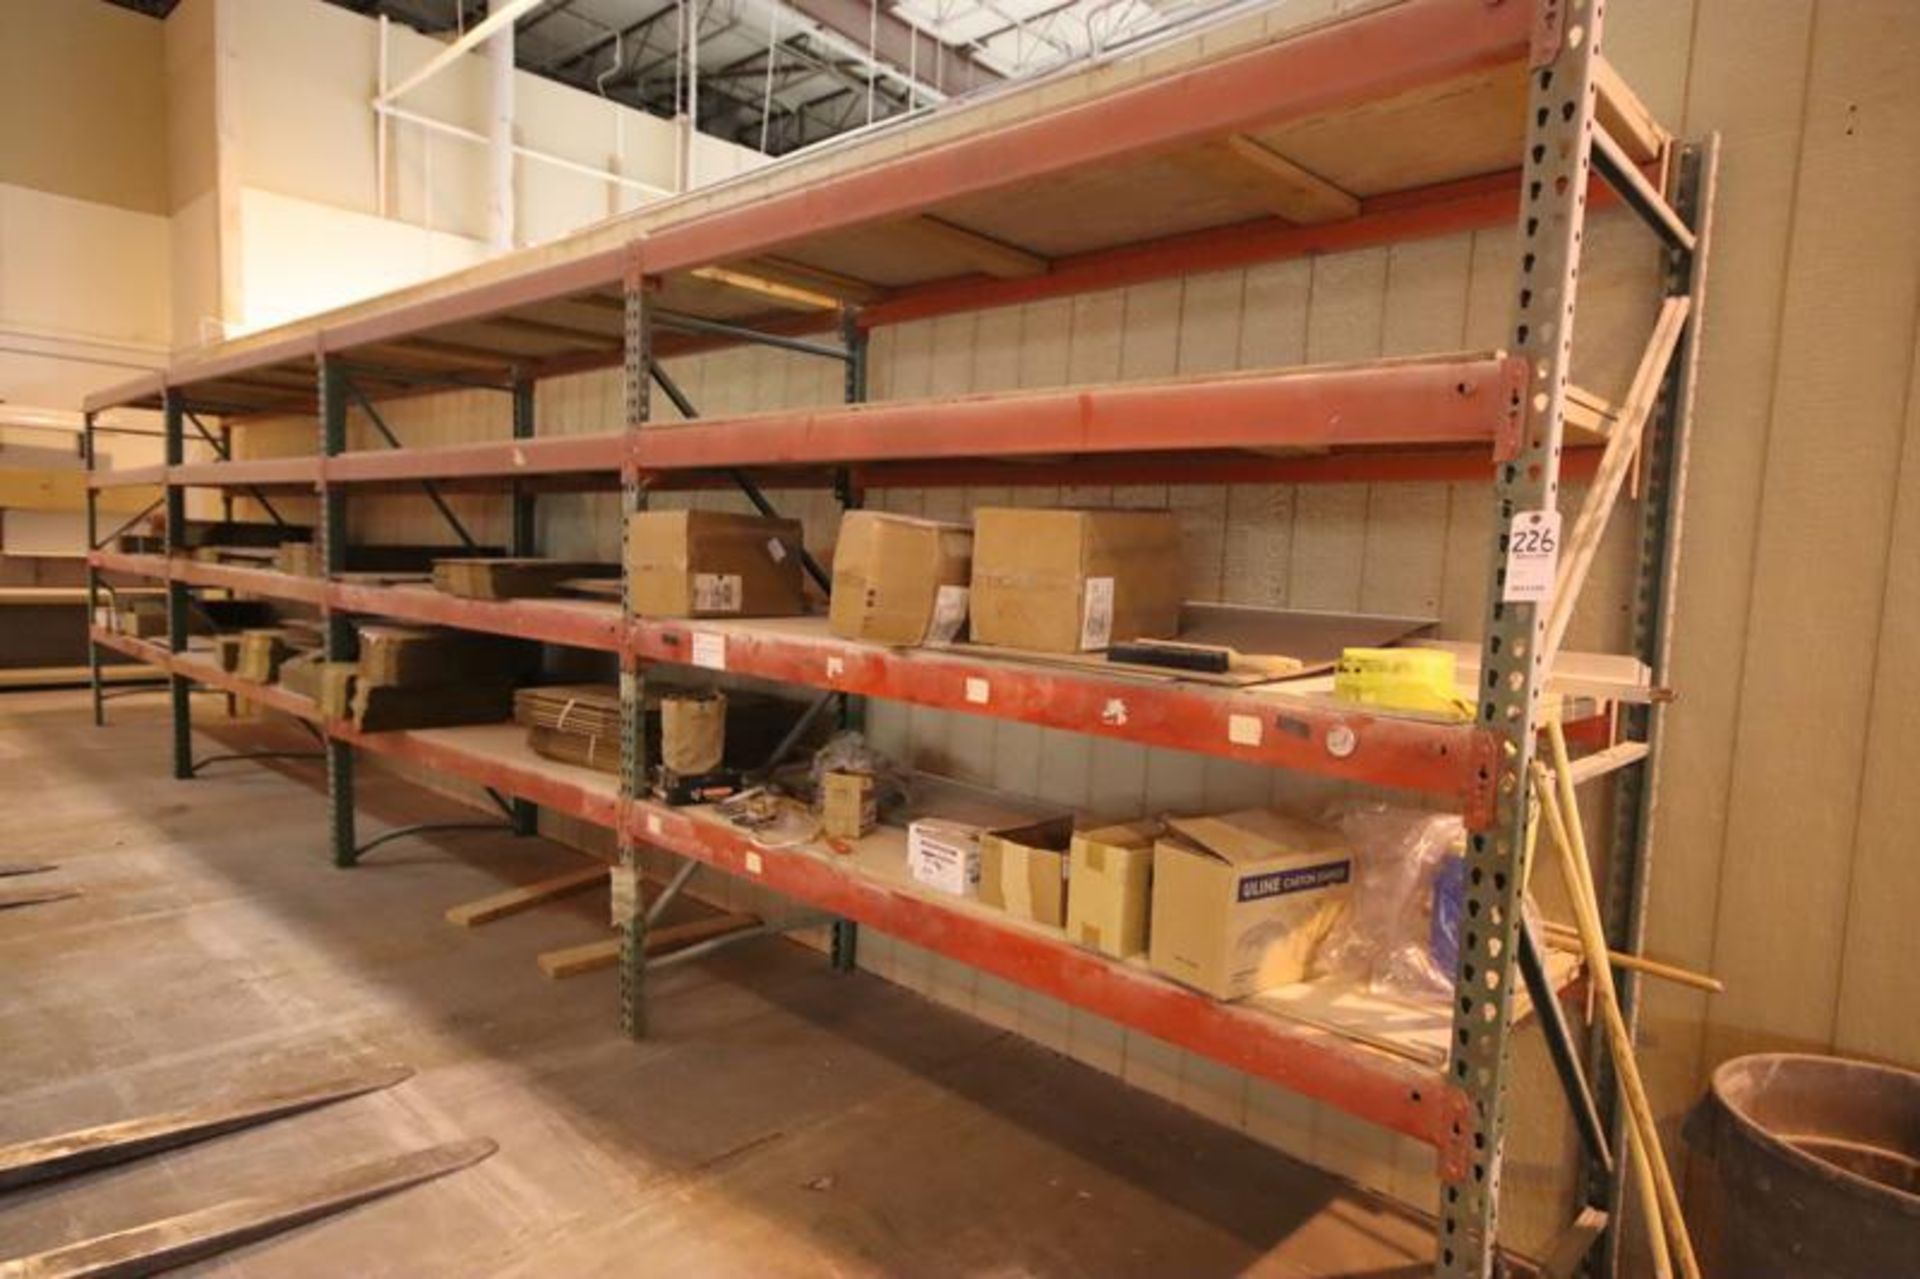 8' x 36" x 8' 4-Sections of Pallet Racking (5) 8' Tall x 36" Wide Uprights, (32) 8' Cross Bars, Wood